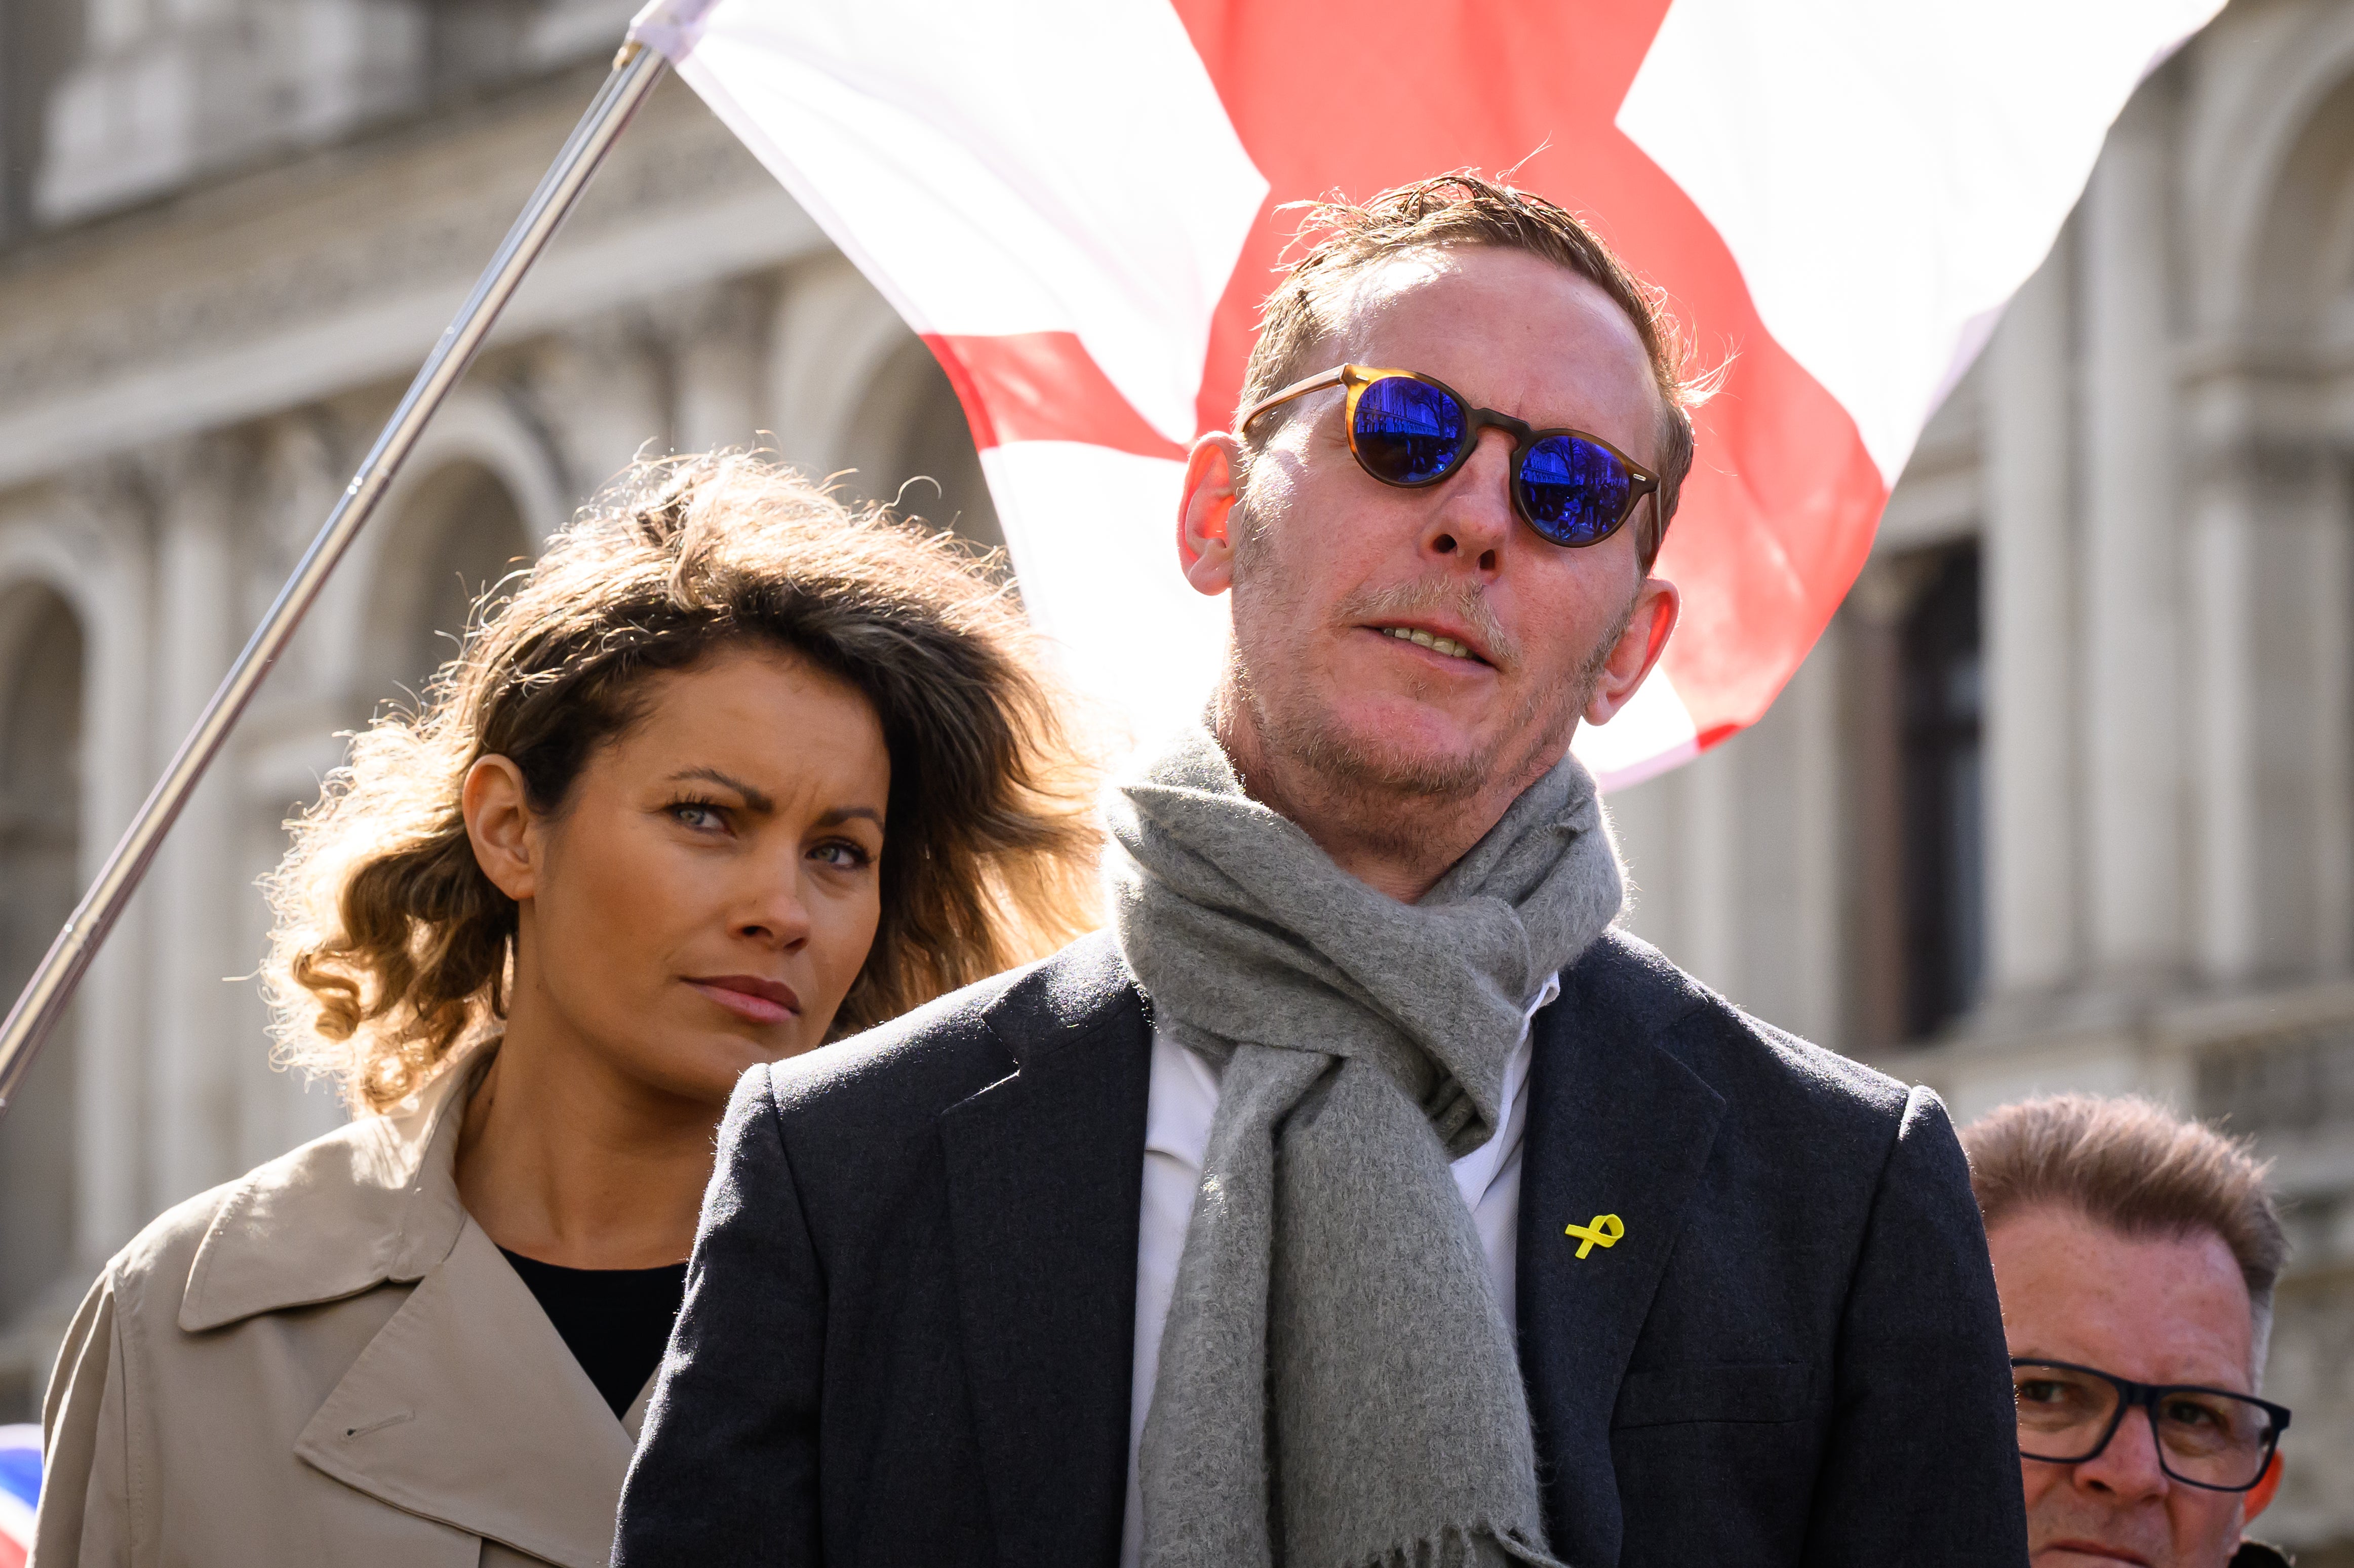 Laurence Fox claimed in a tweet that his exclusion was due to ‘political corruption’